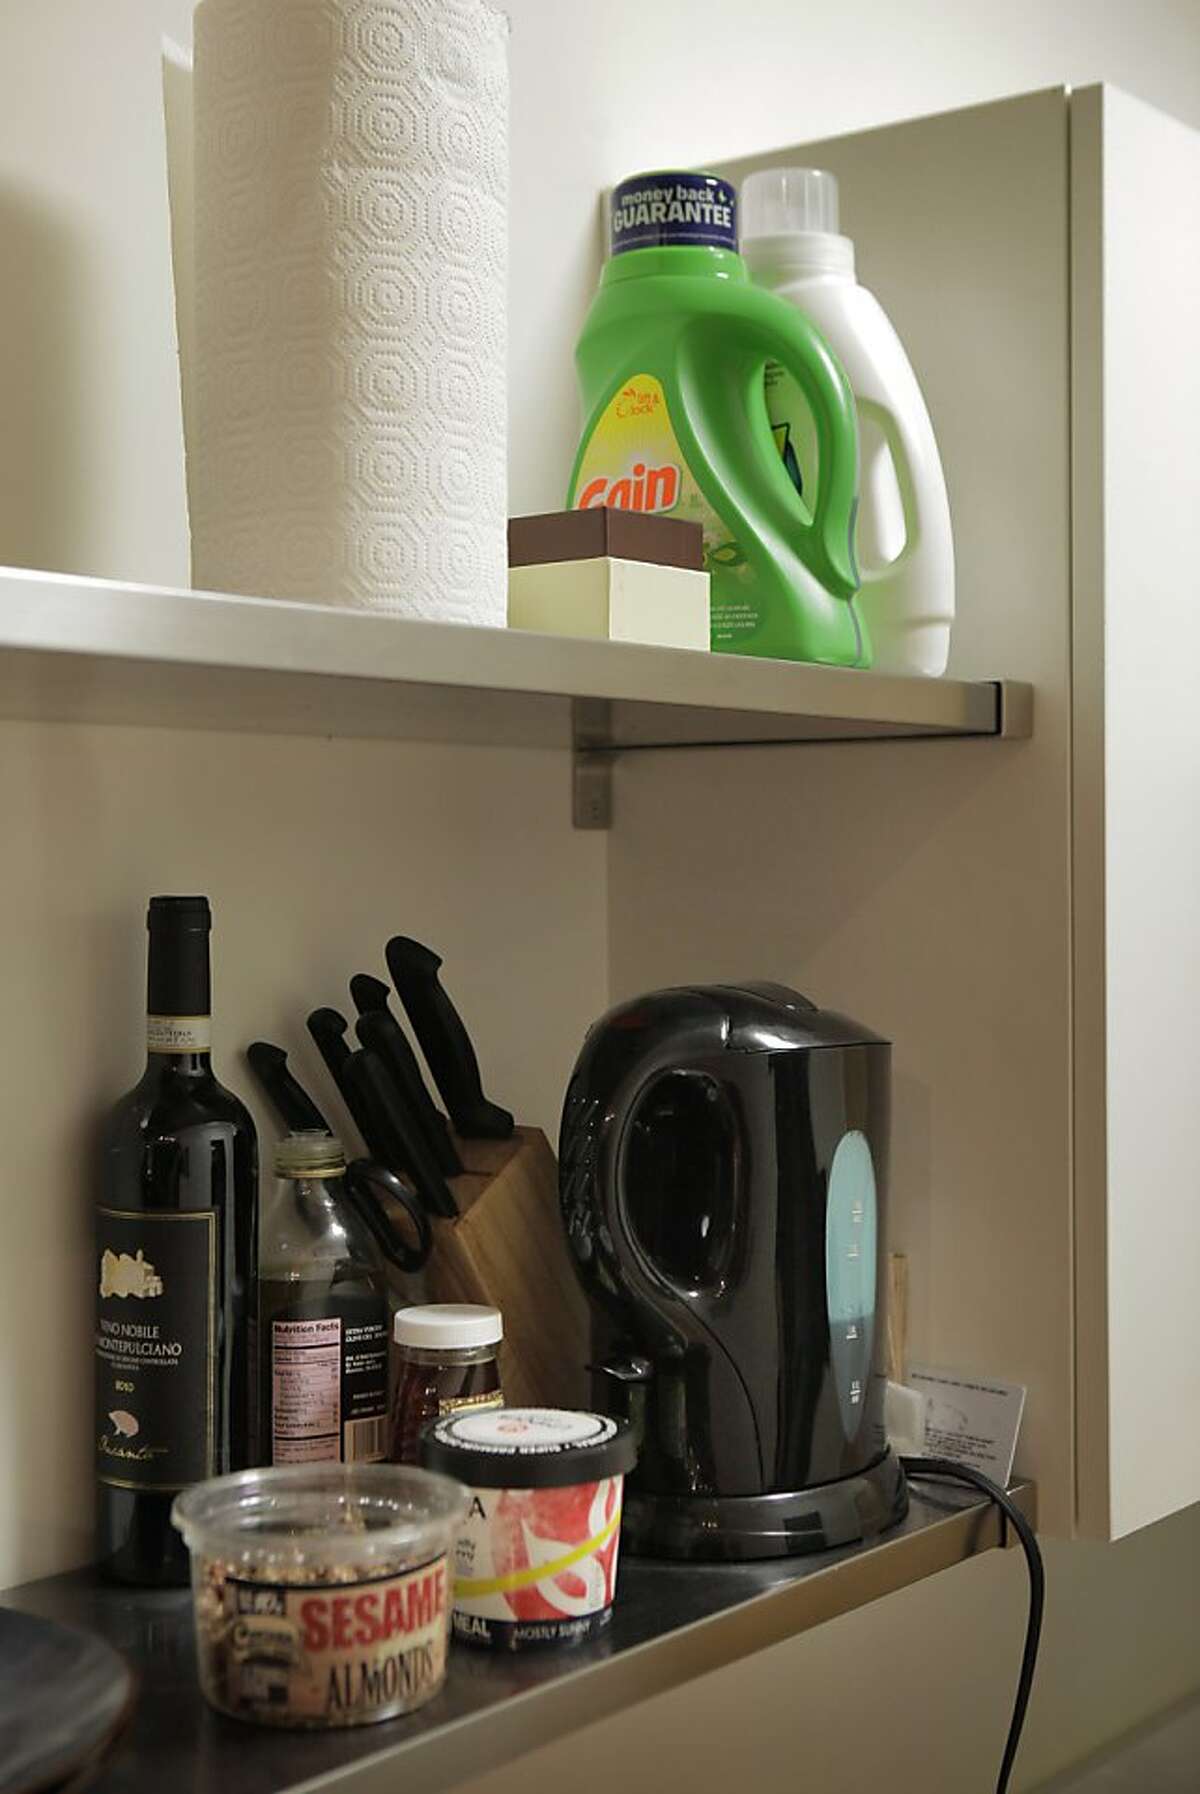 Having limited storage space, Kayla Smith stores her laundry supplies in the shelves of her kitchen along with her coffee maker in her San Francisco, Calif., apartment on Tuesday, October 29, 2013. Smith moved into the micro apartment about two months ago, when she was hired by Webpass, a San Francisco-based internet company. The tiny space, about 280 square feet is perfect for her lifestyle at the moment, she says, but she still needs to furnish the apartment so it feels less sparse.